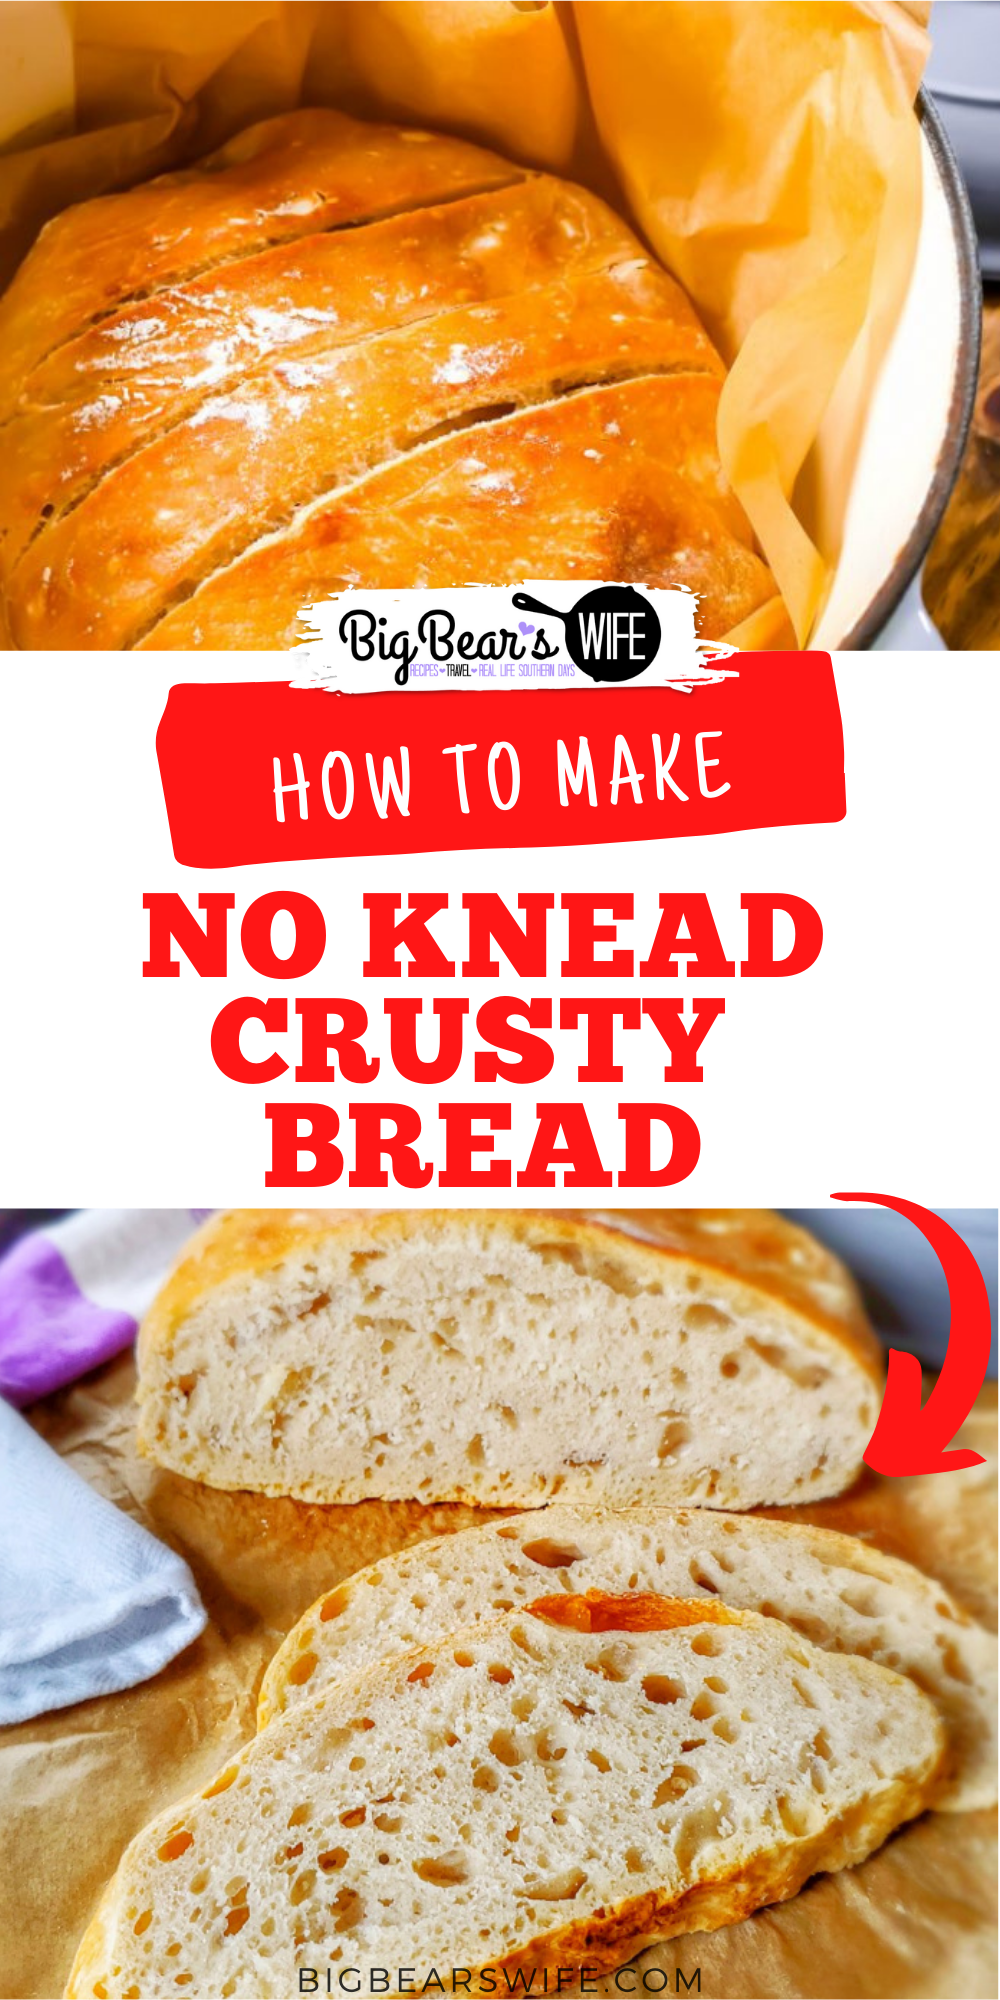 Ready to learn how to make the easiest No Knead Crusty Bread at home? I’ve got step by step photos and directions to teach you how to bake it in your own kitchen! via @bigbearswife